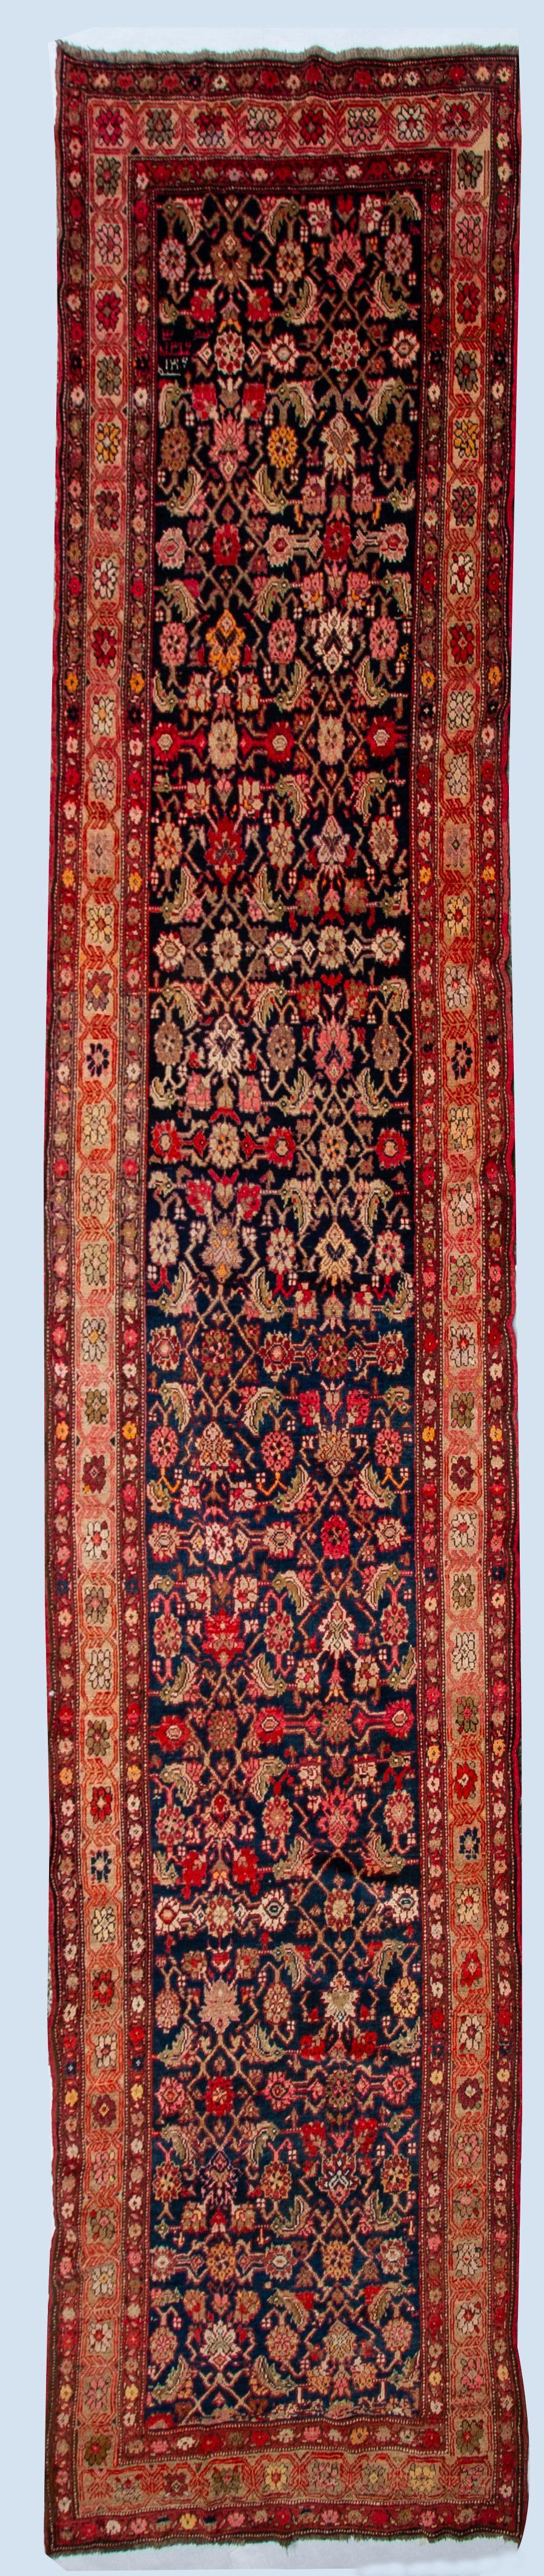 Long beautiful Karebagh runner, one of the best Caucasian carpets. Design is the famous 